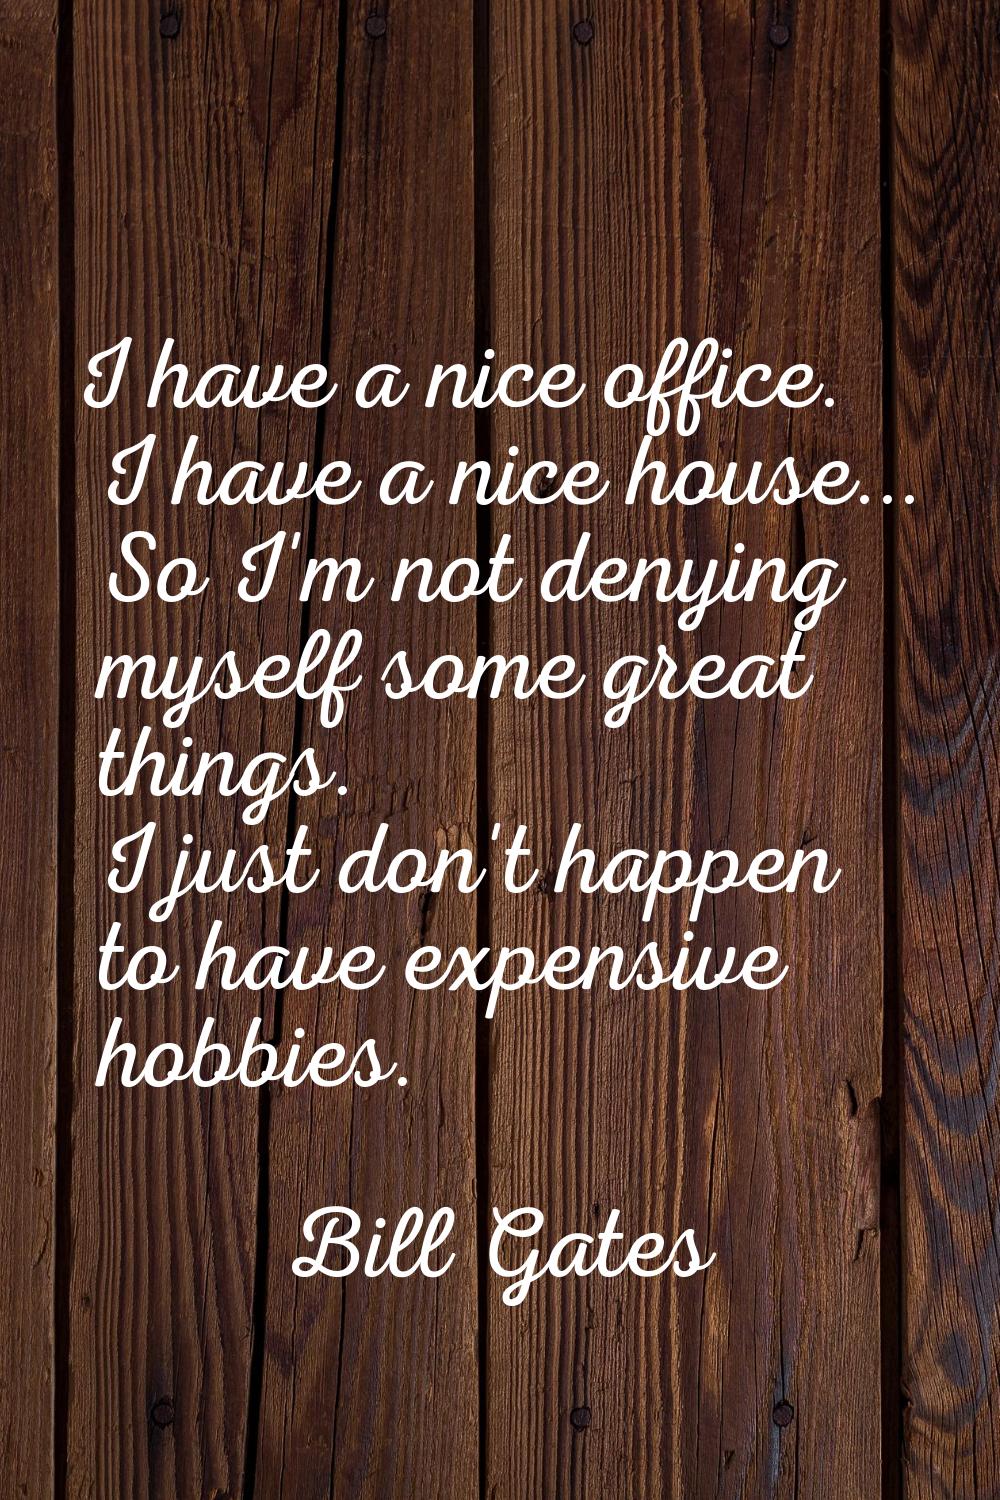 I have a nice office. I have a nice house... So I'm not denying myself some great things. I just do